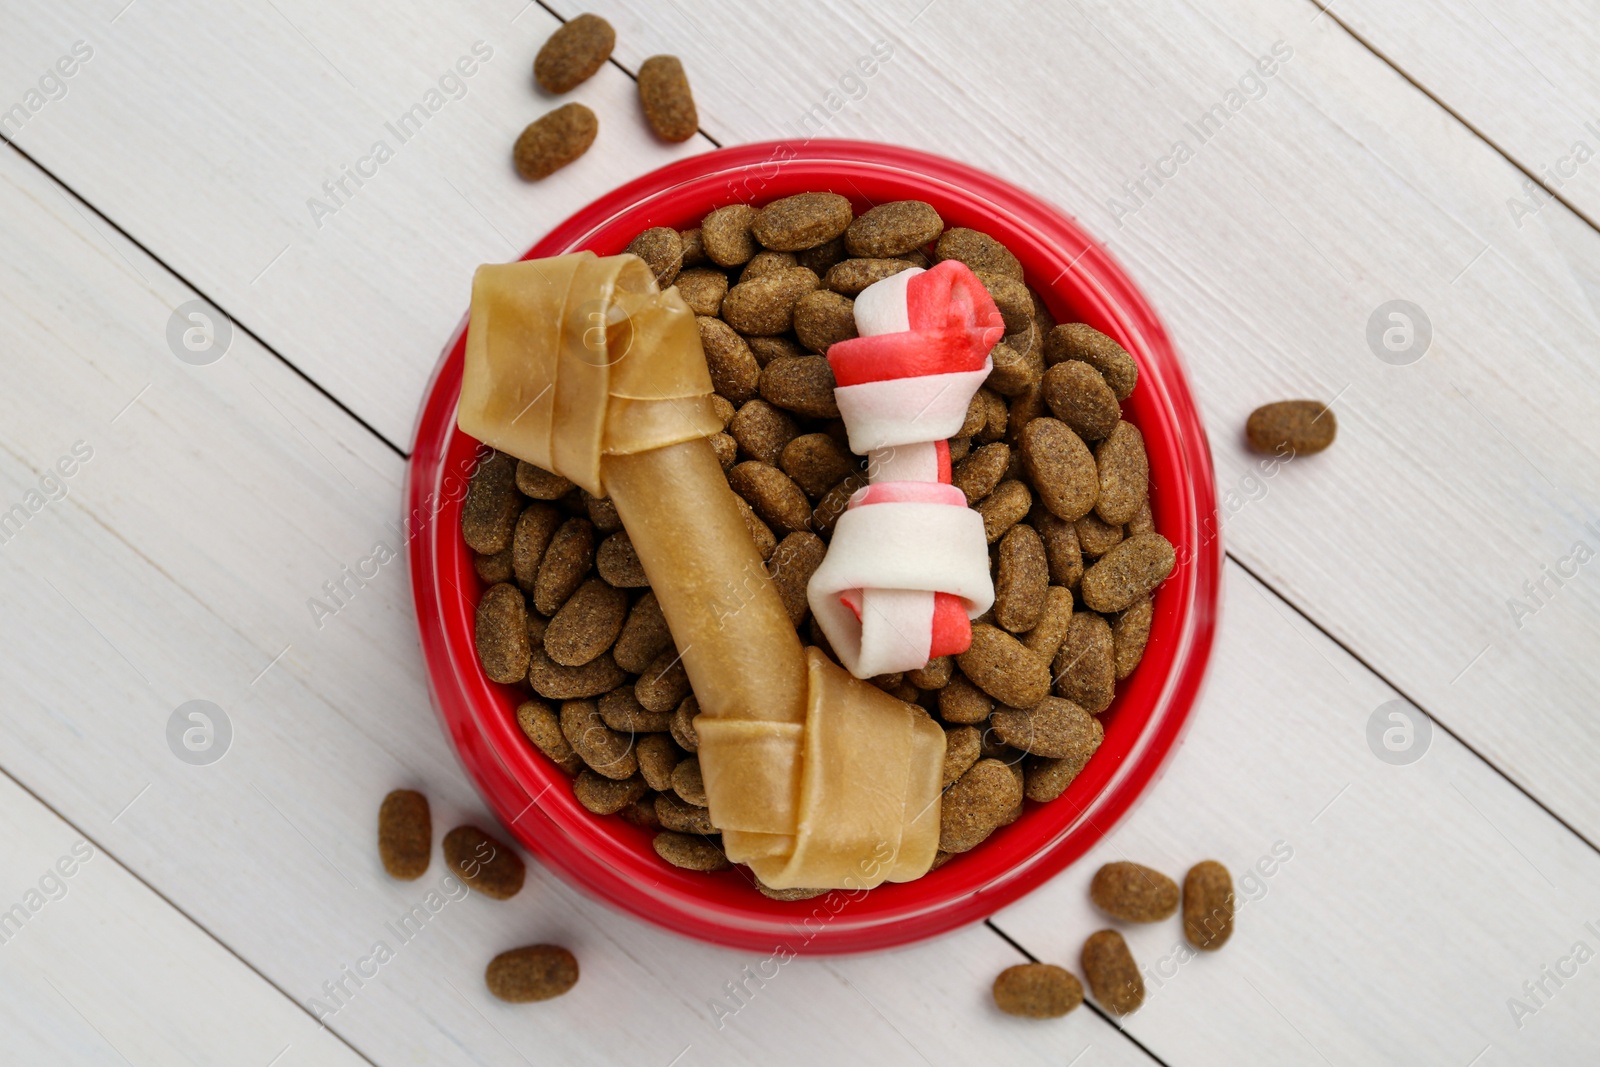 Photo of Dry dog food and treats (chew bones) on white wooden floor, flat lay